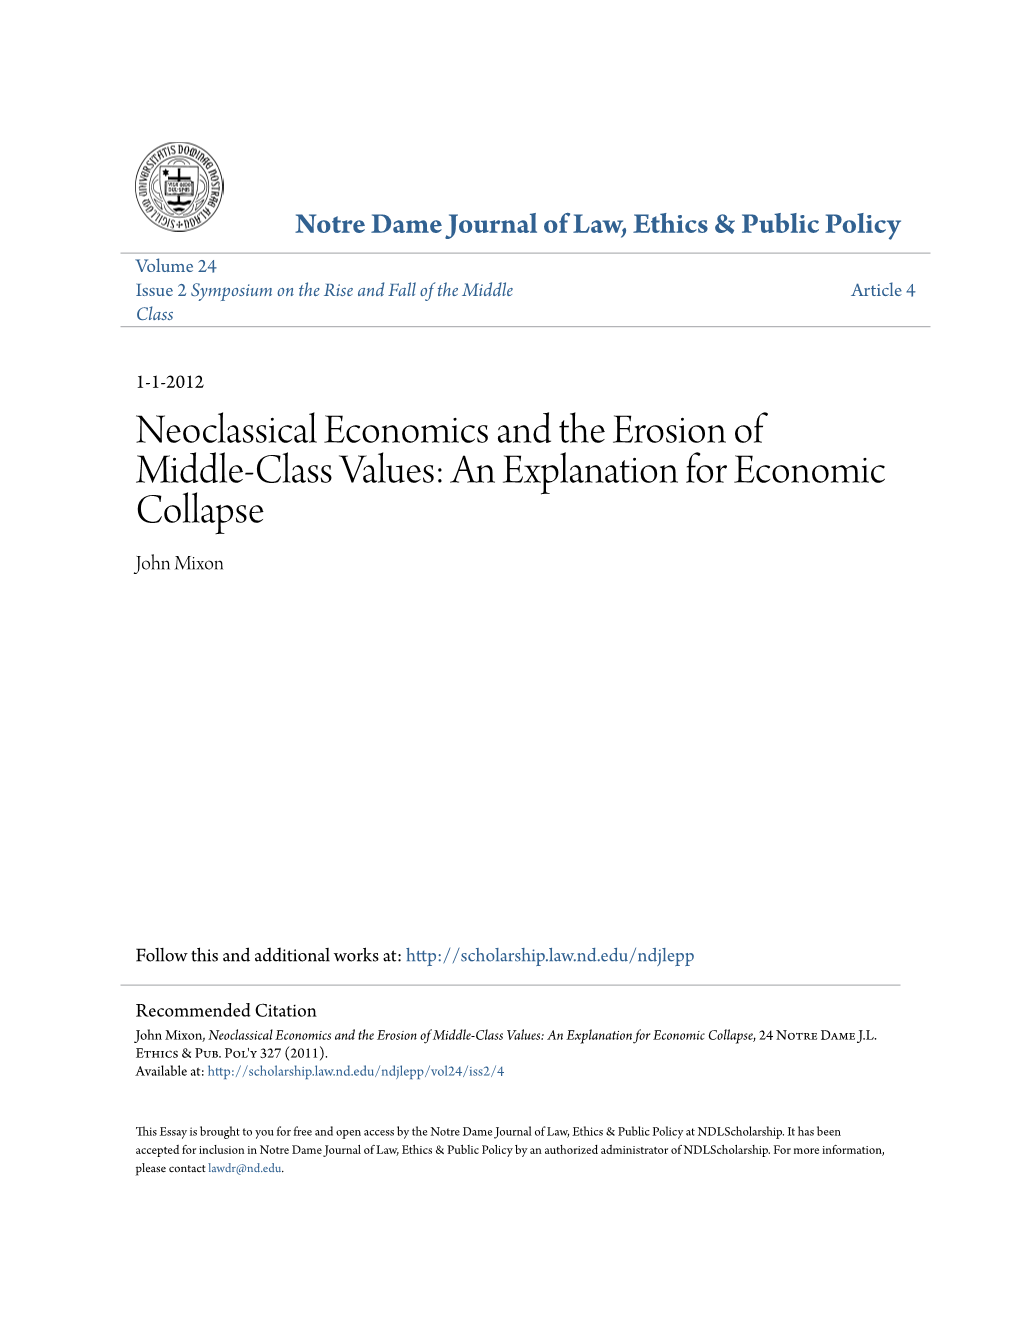 Neoclassical Economics and the Erosion of Middle-Class Values: an Explanation for Economic Collapse John Mixon